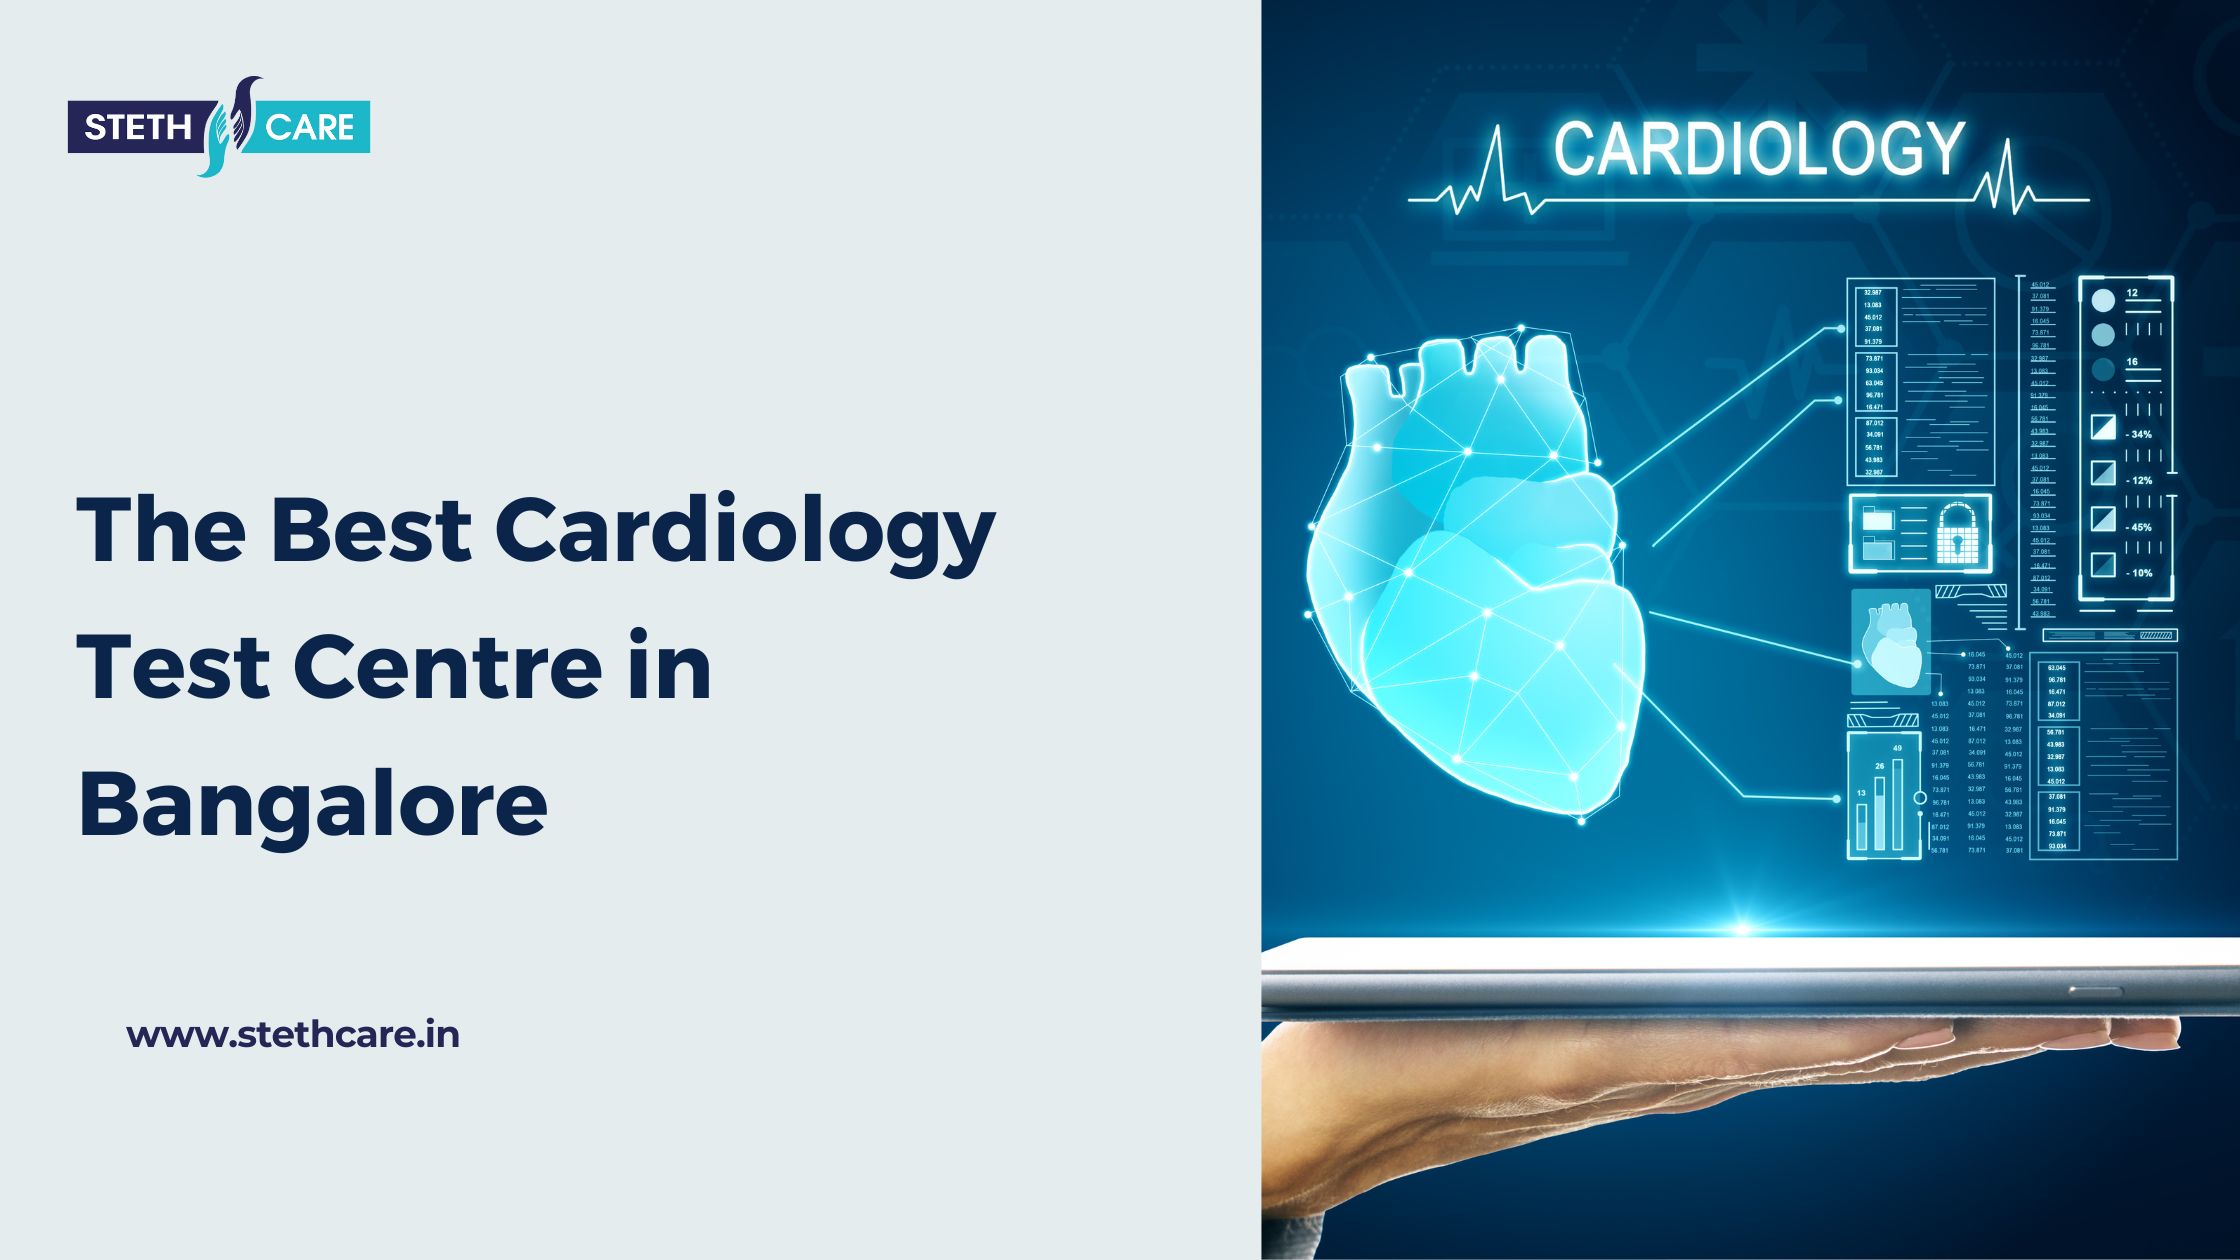 The Best Cardiology Test Centre in Bangalore